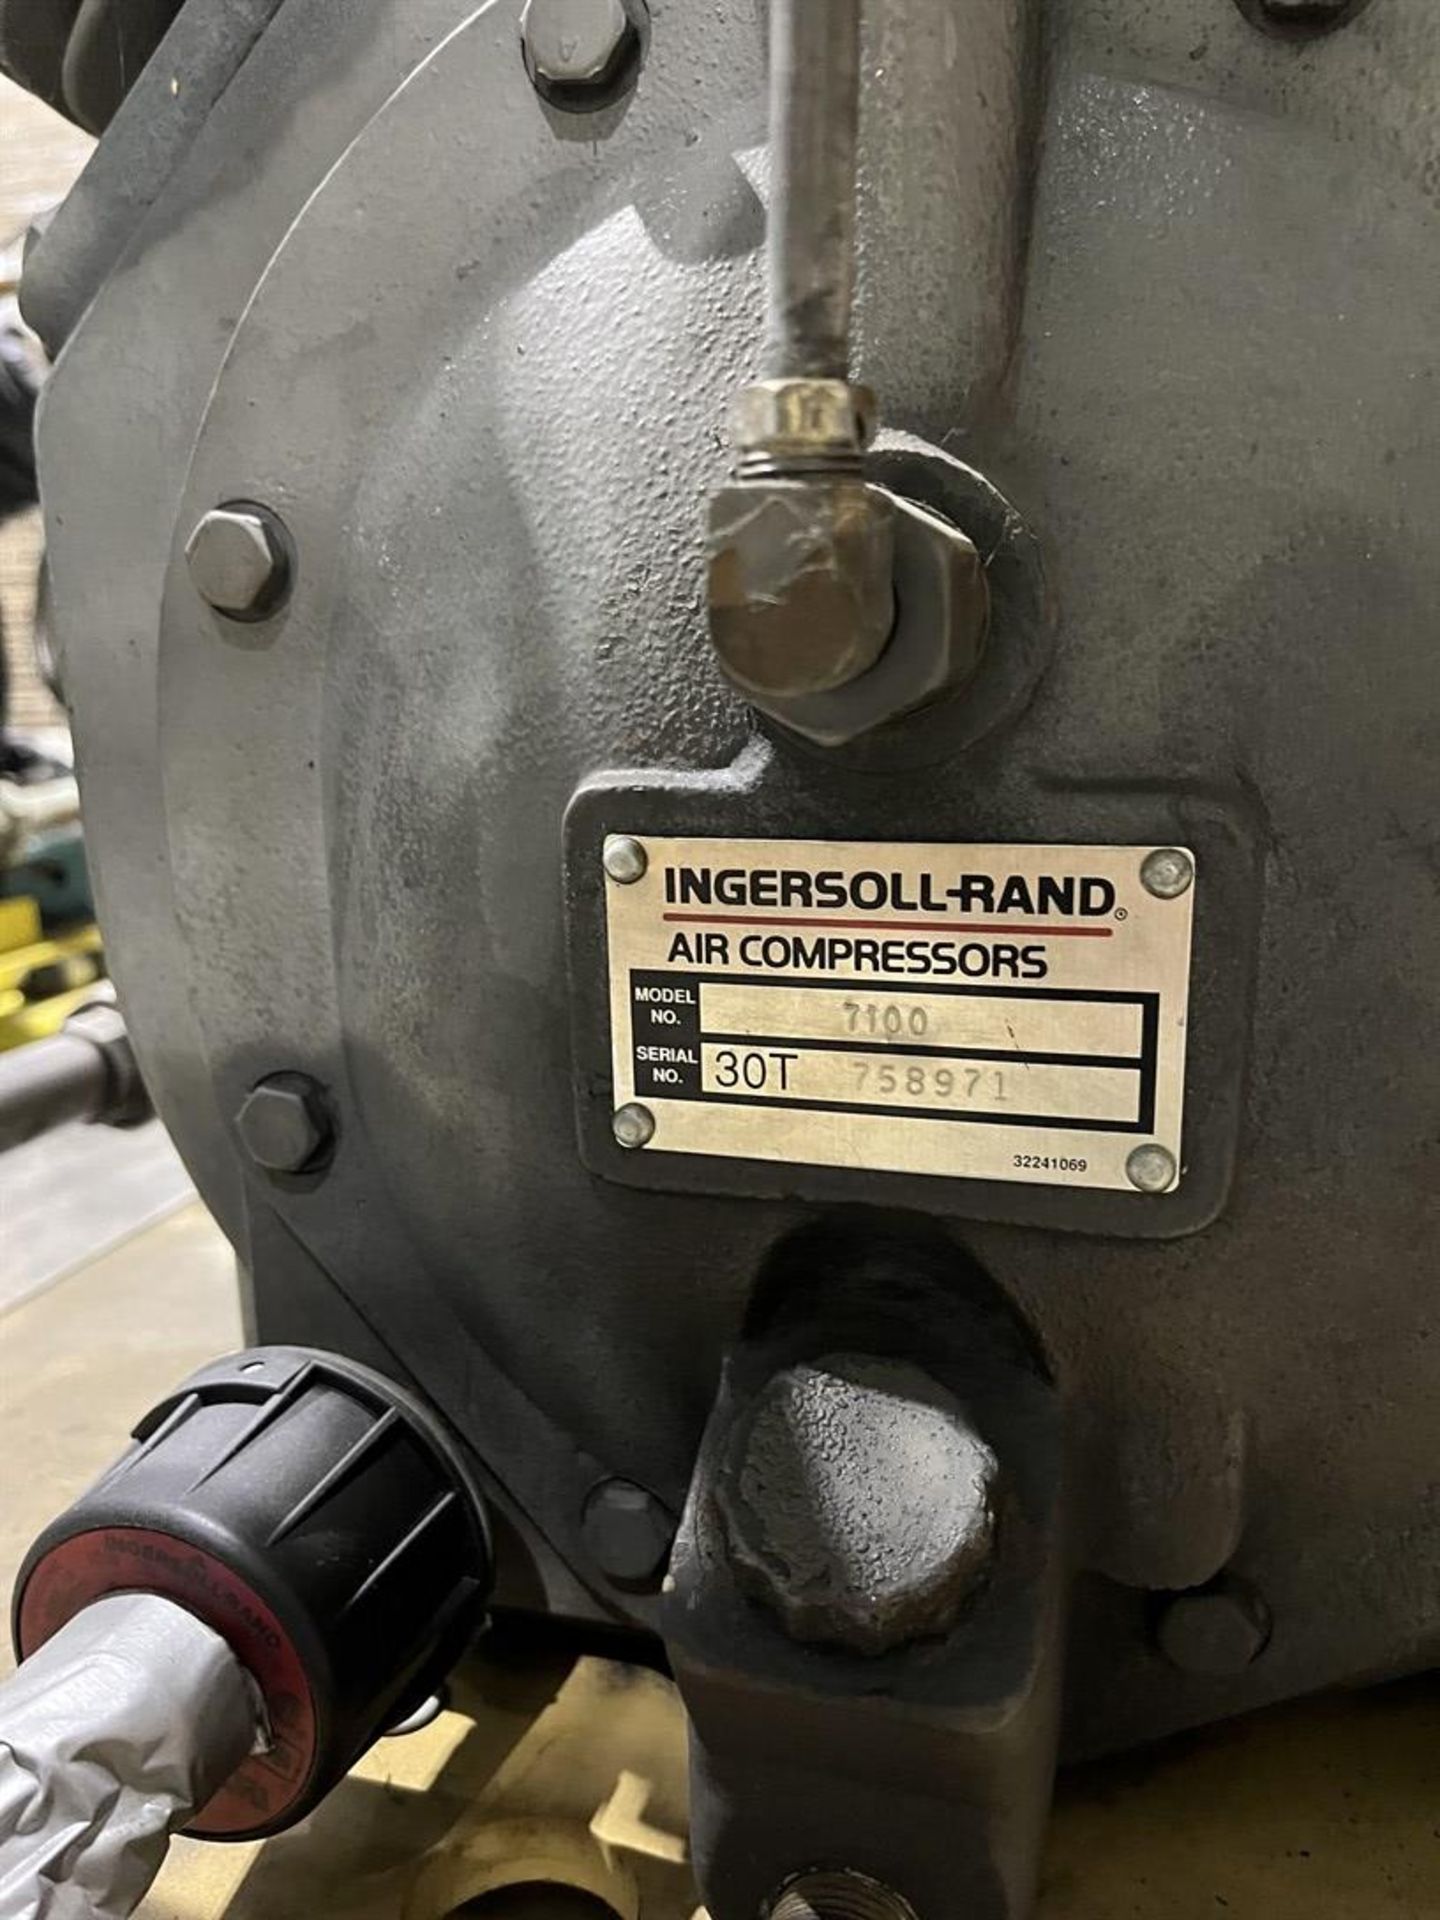 INGERSOLL RAND 7100 Air Compressor, s/n 30T 758971 - Image 3 of 4